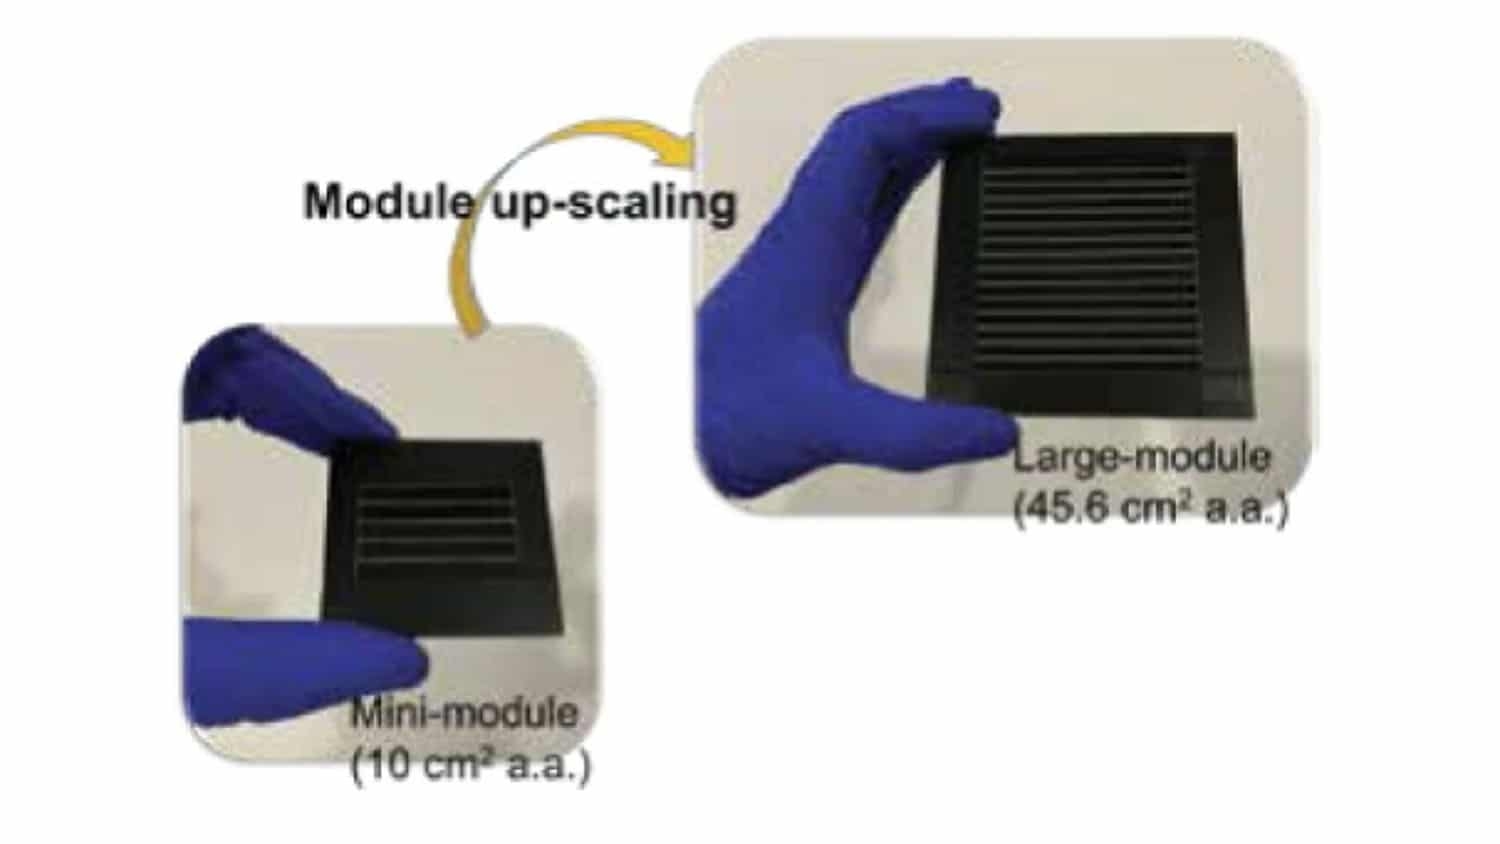 gloved hands hold up solar cell panels of different sizes